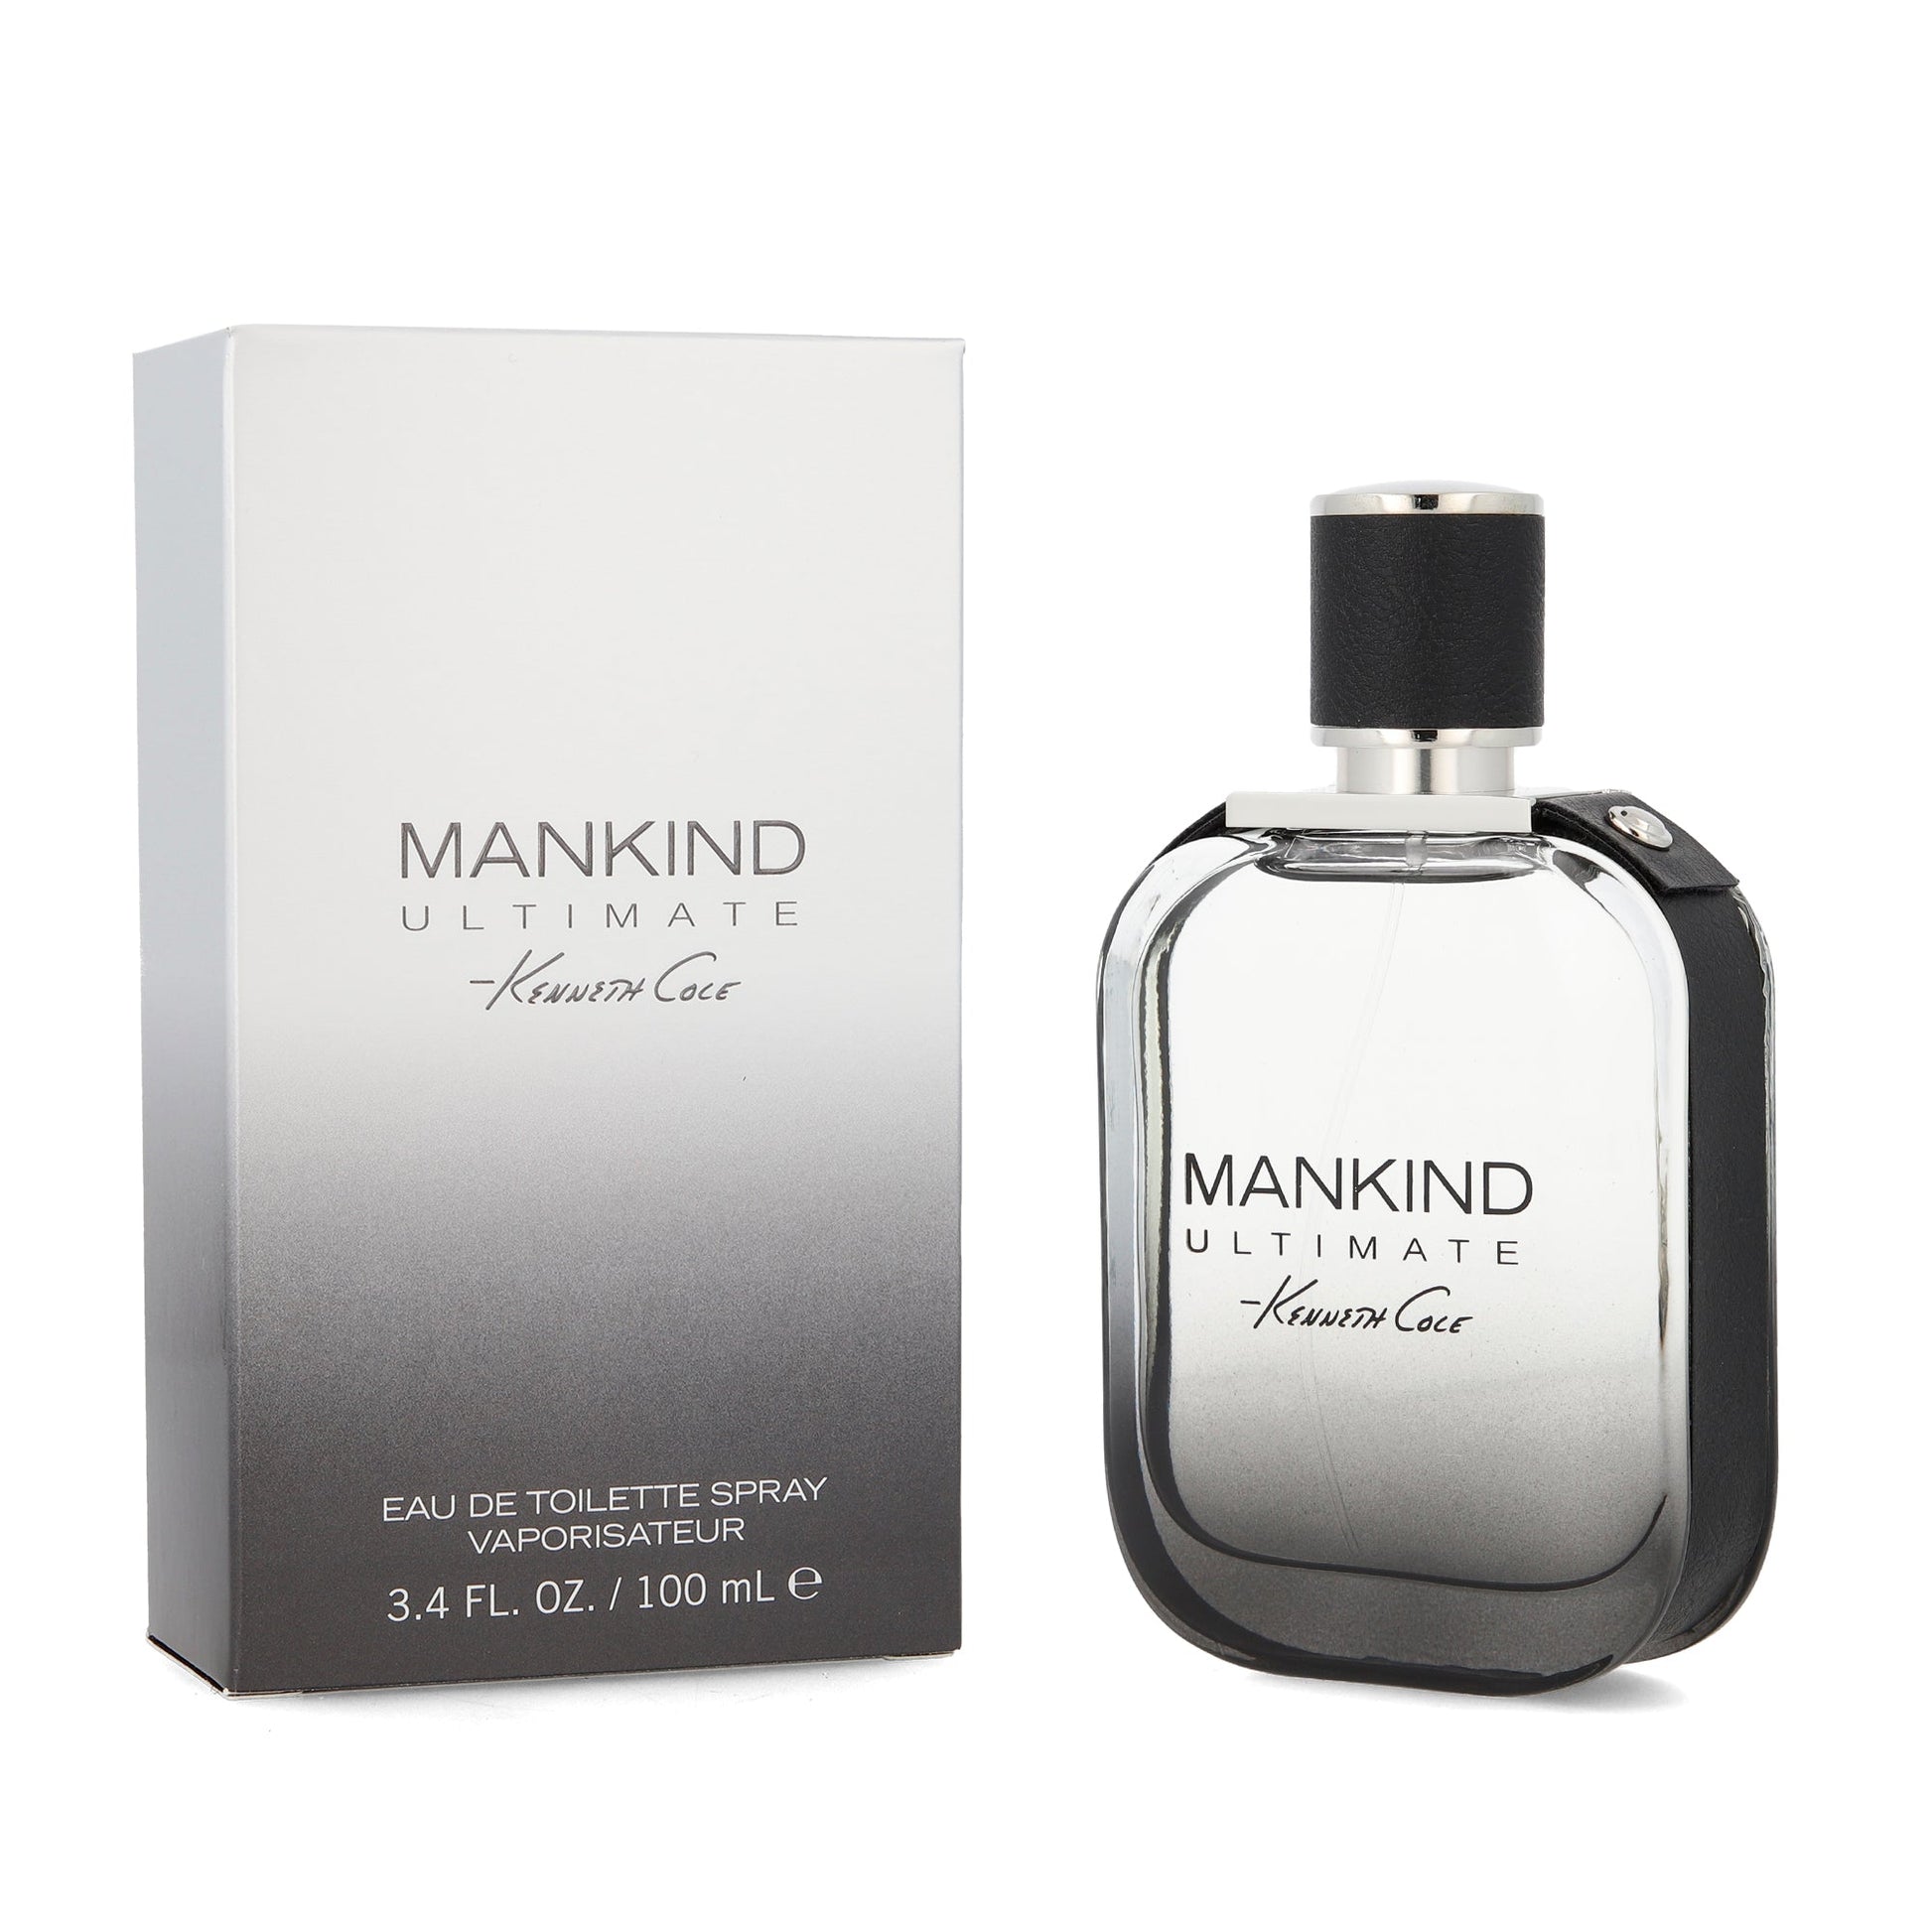 KENNETH COLE MANKIND ULTIMATE 100 ML EDT SPRAY